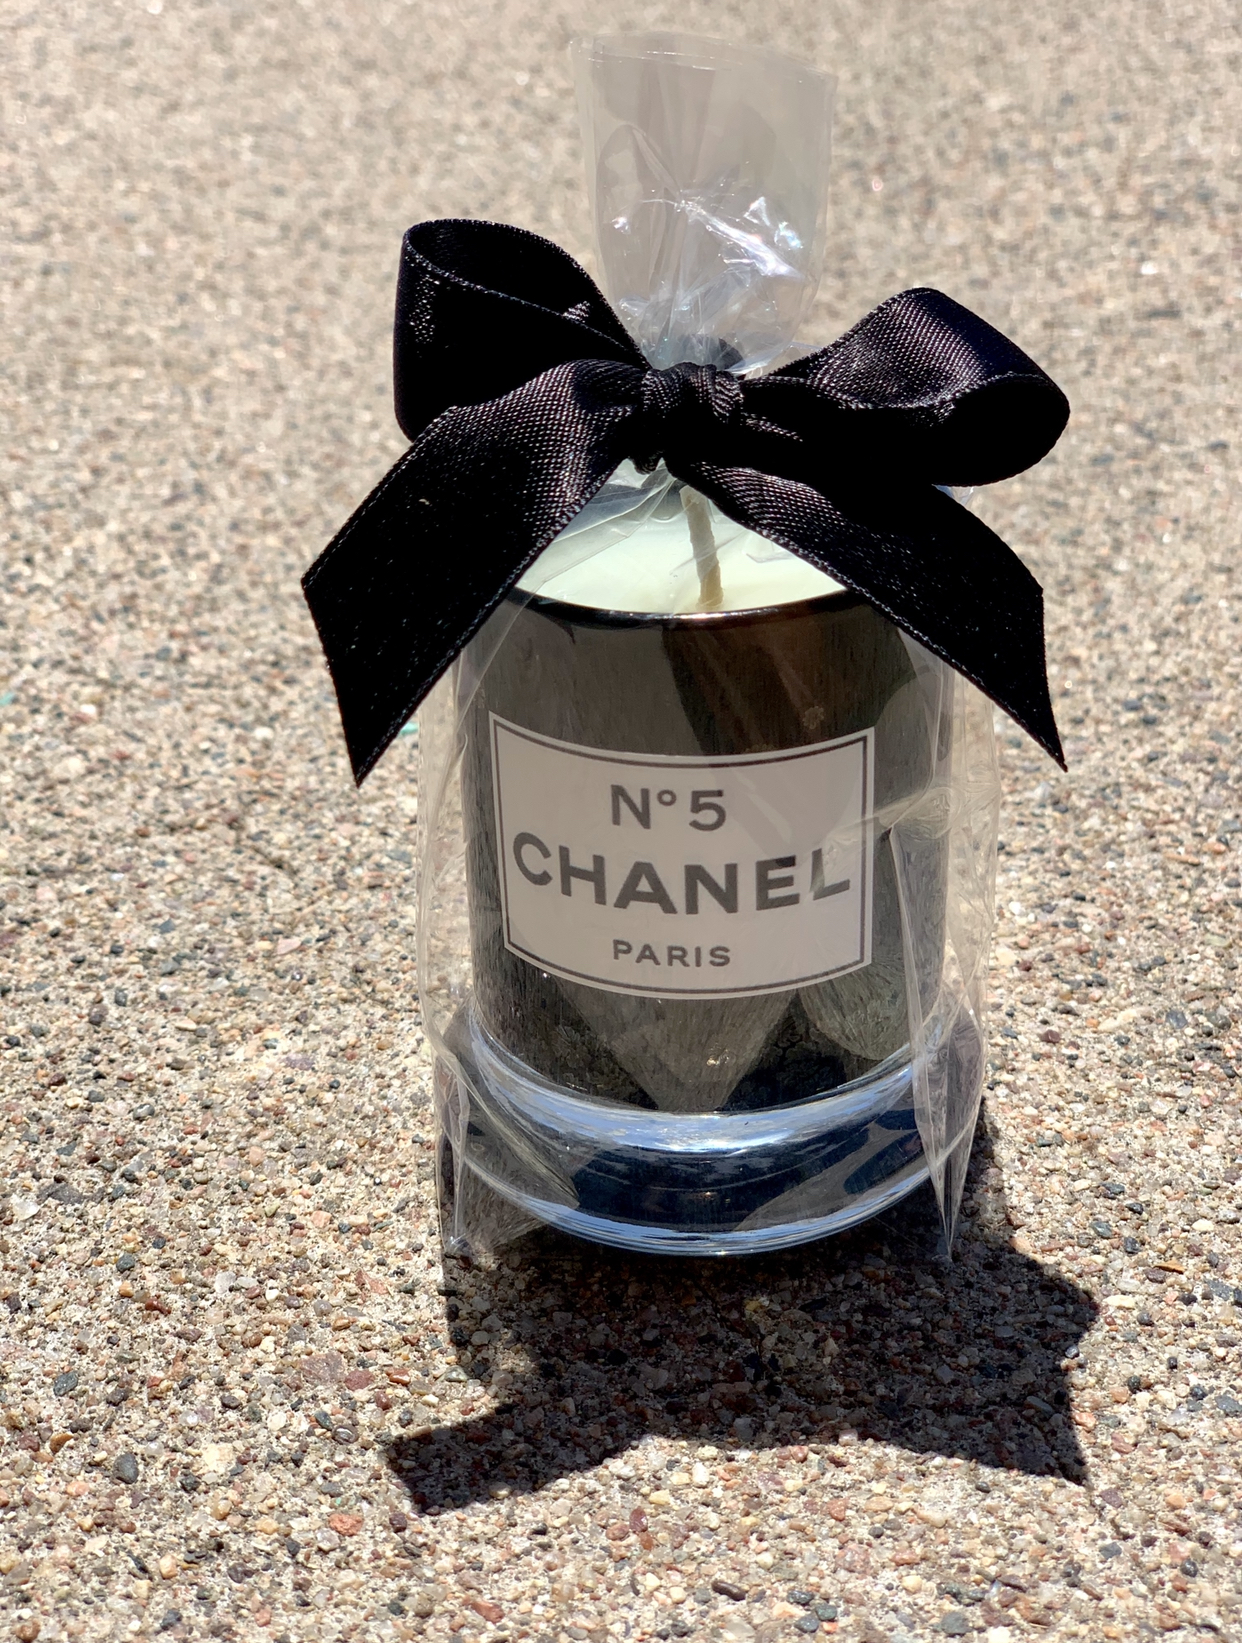 Chanel NO.5 candles now on sale at VaVaVoom-K.com ‼️